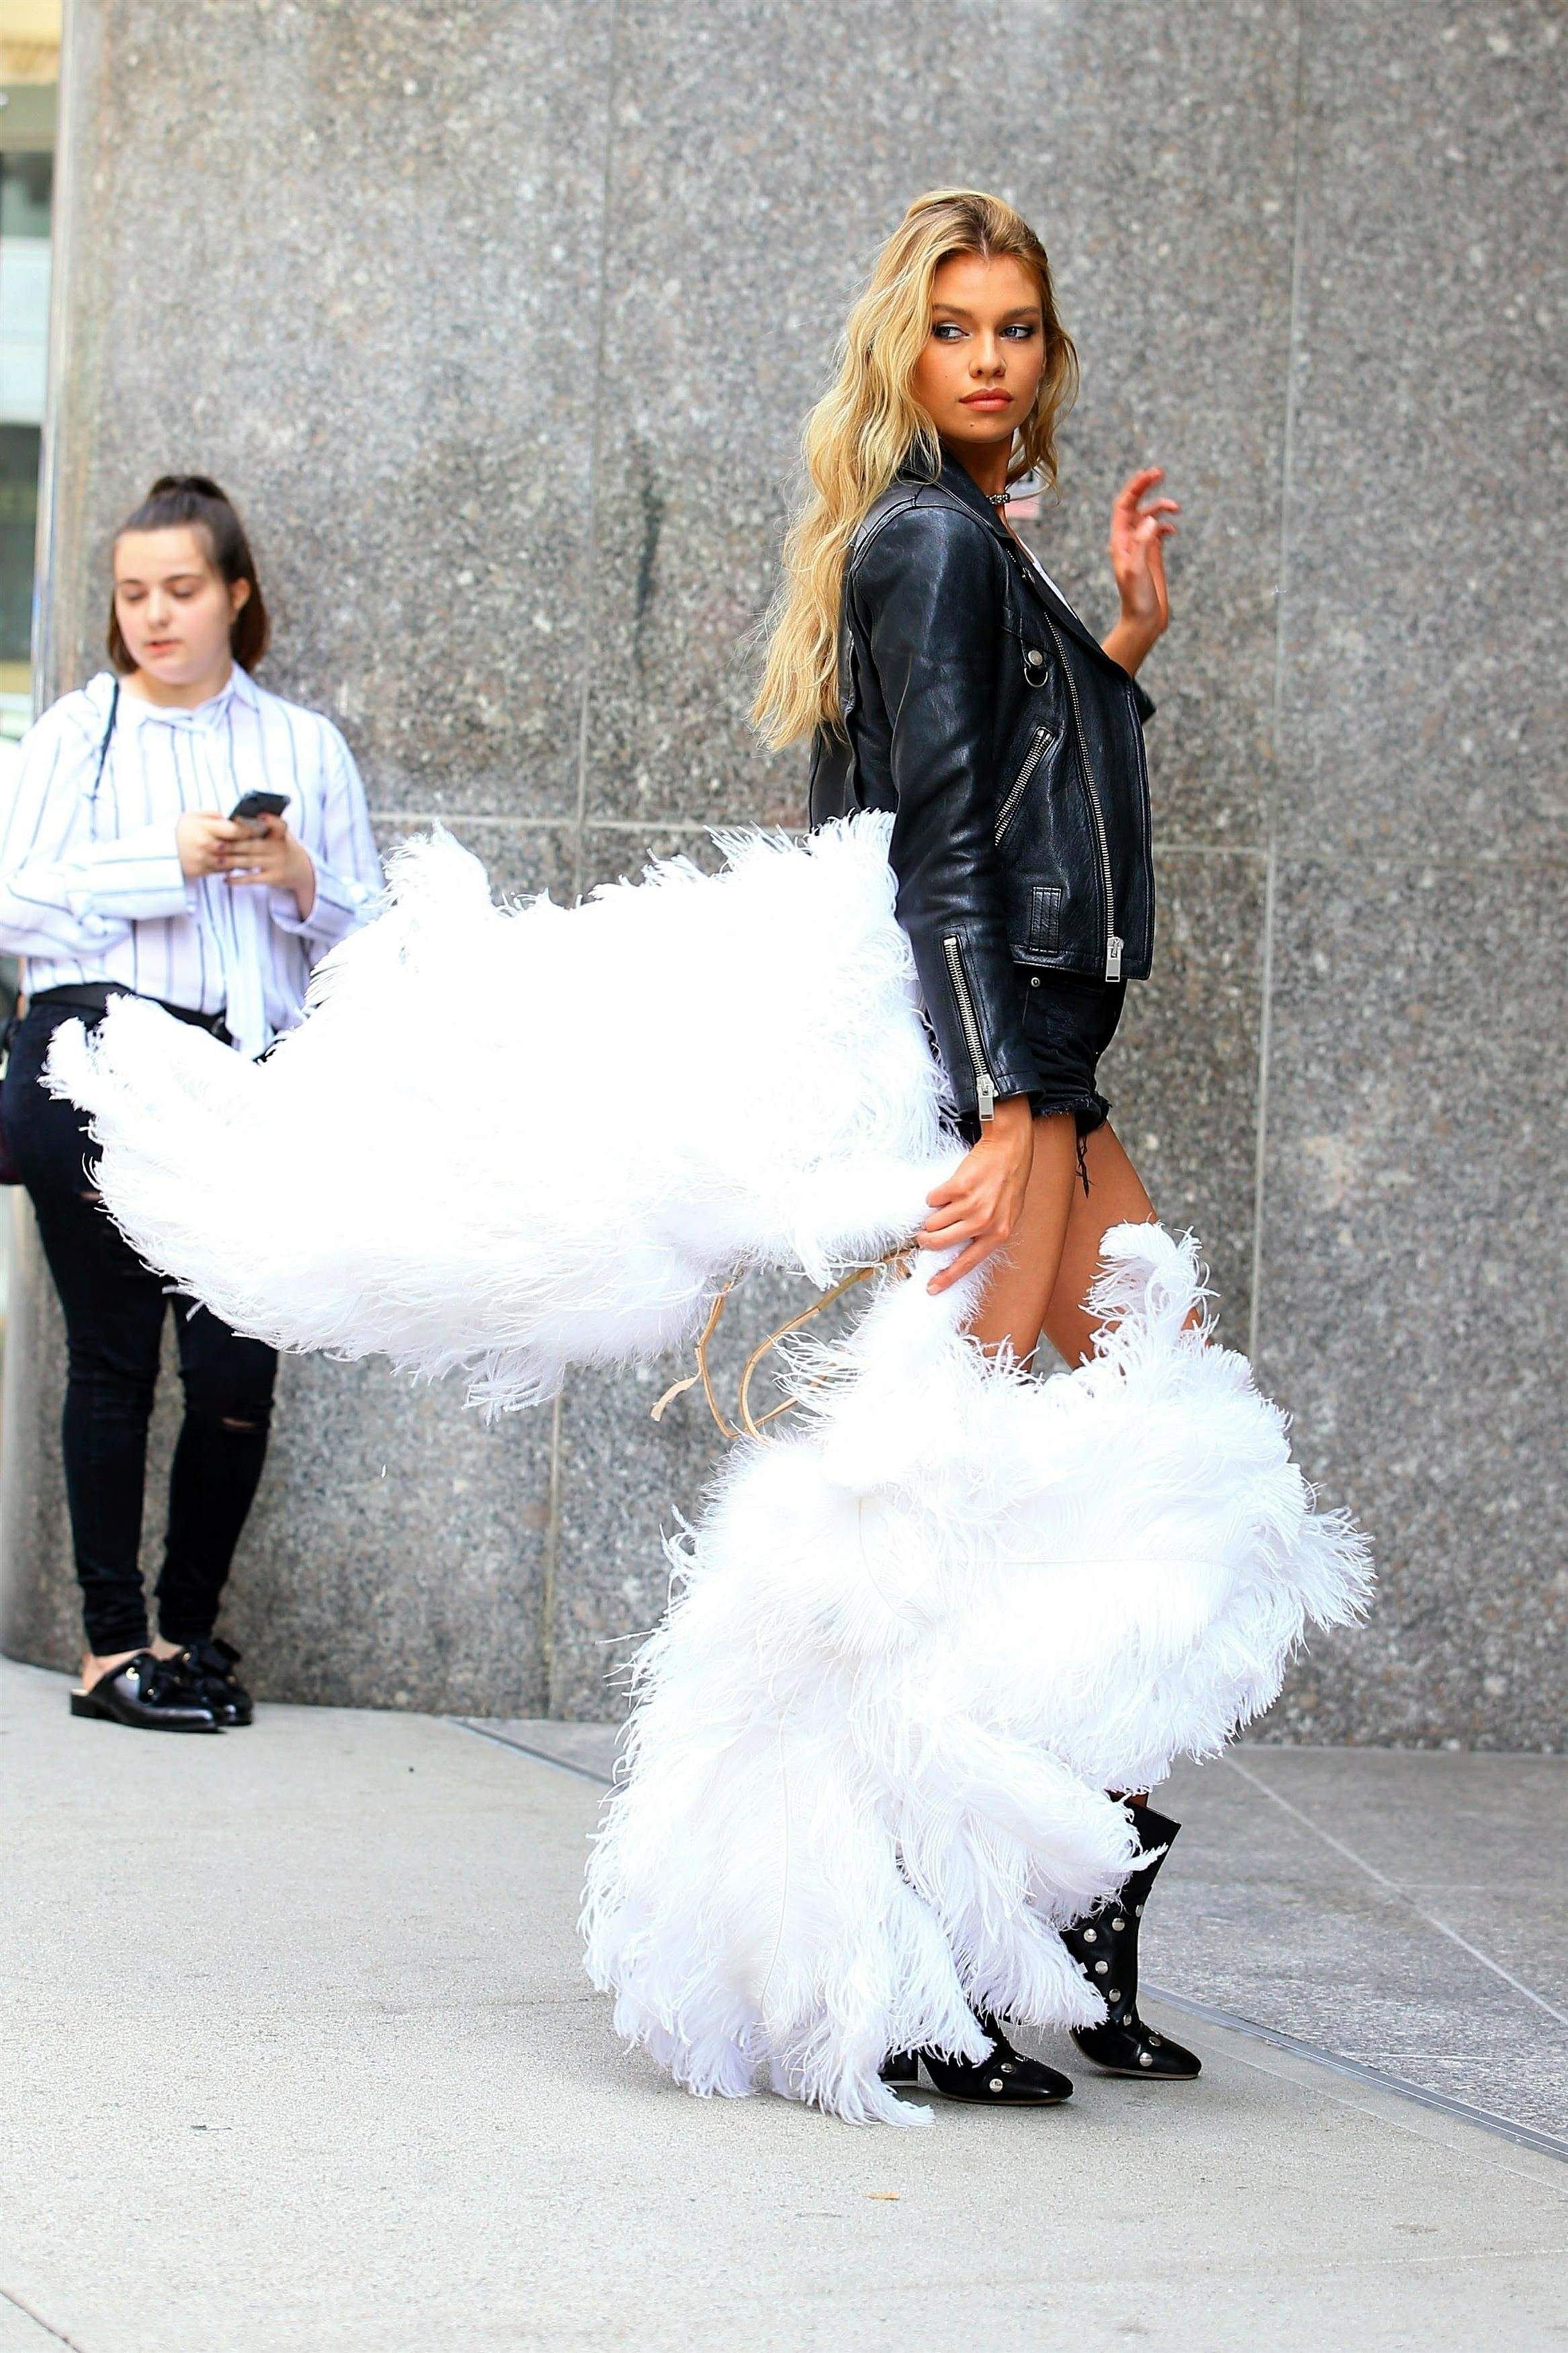 Stella Maxwell leaving the Victoria’s Secret offices